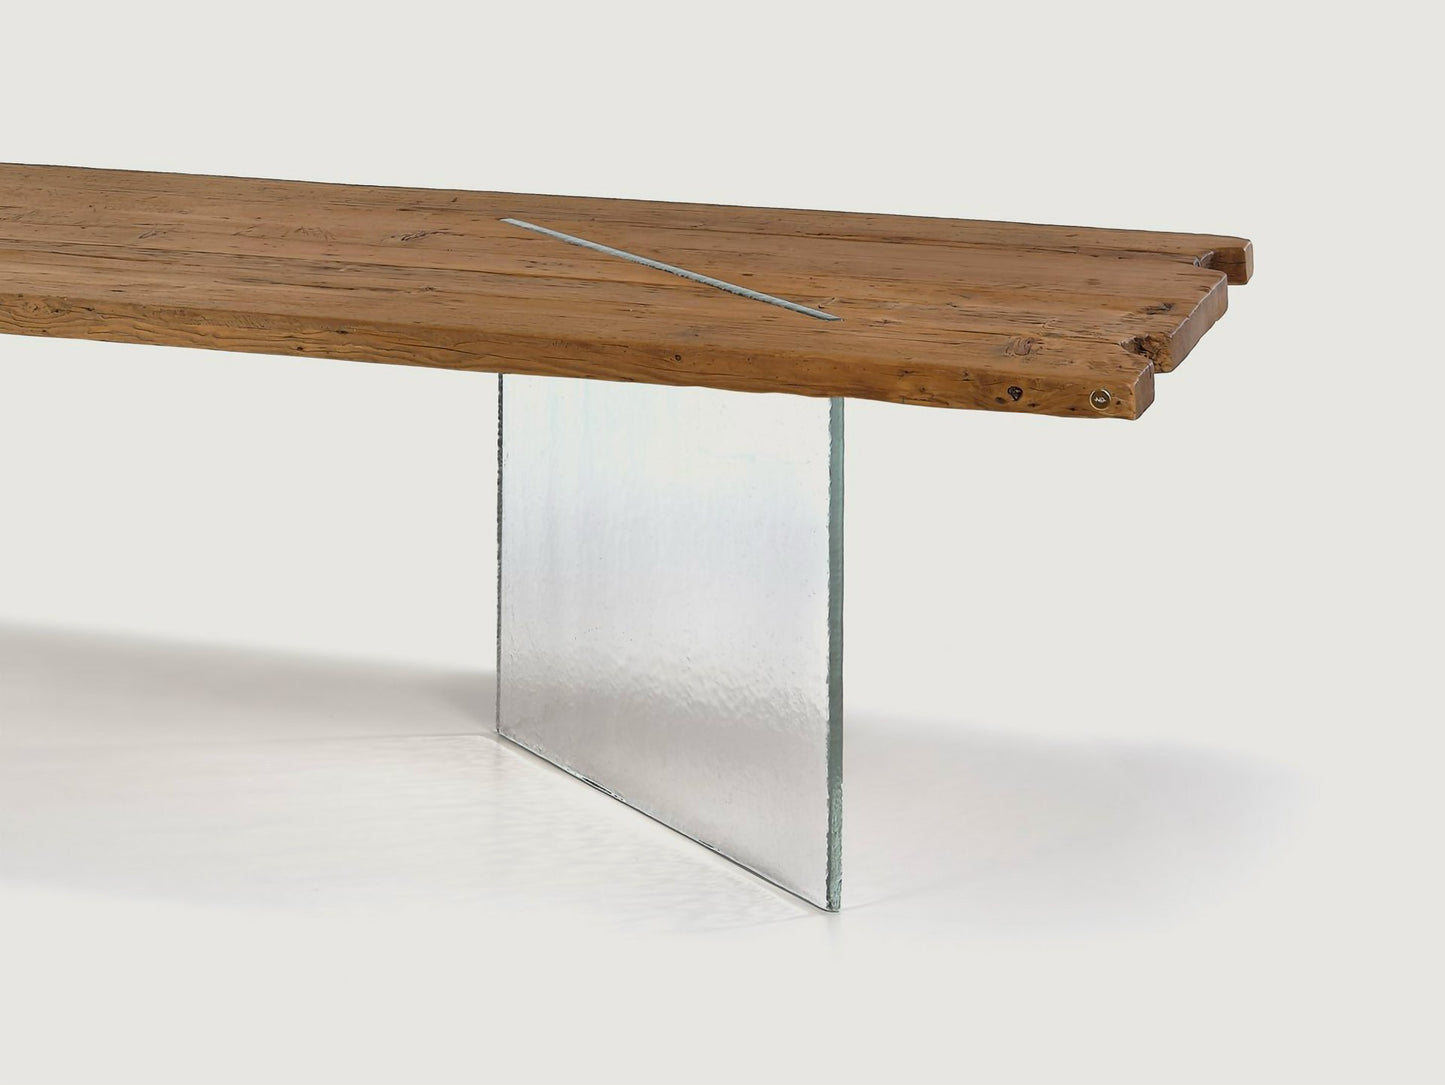 ILL MURANO l dining table by NATUREDESIGN